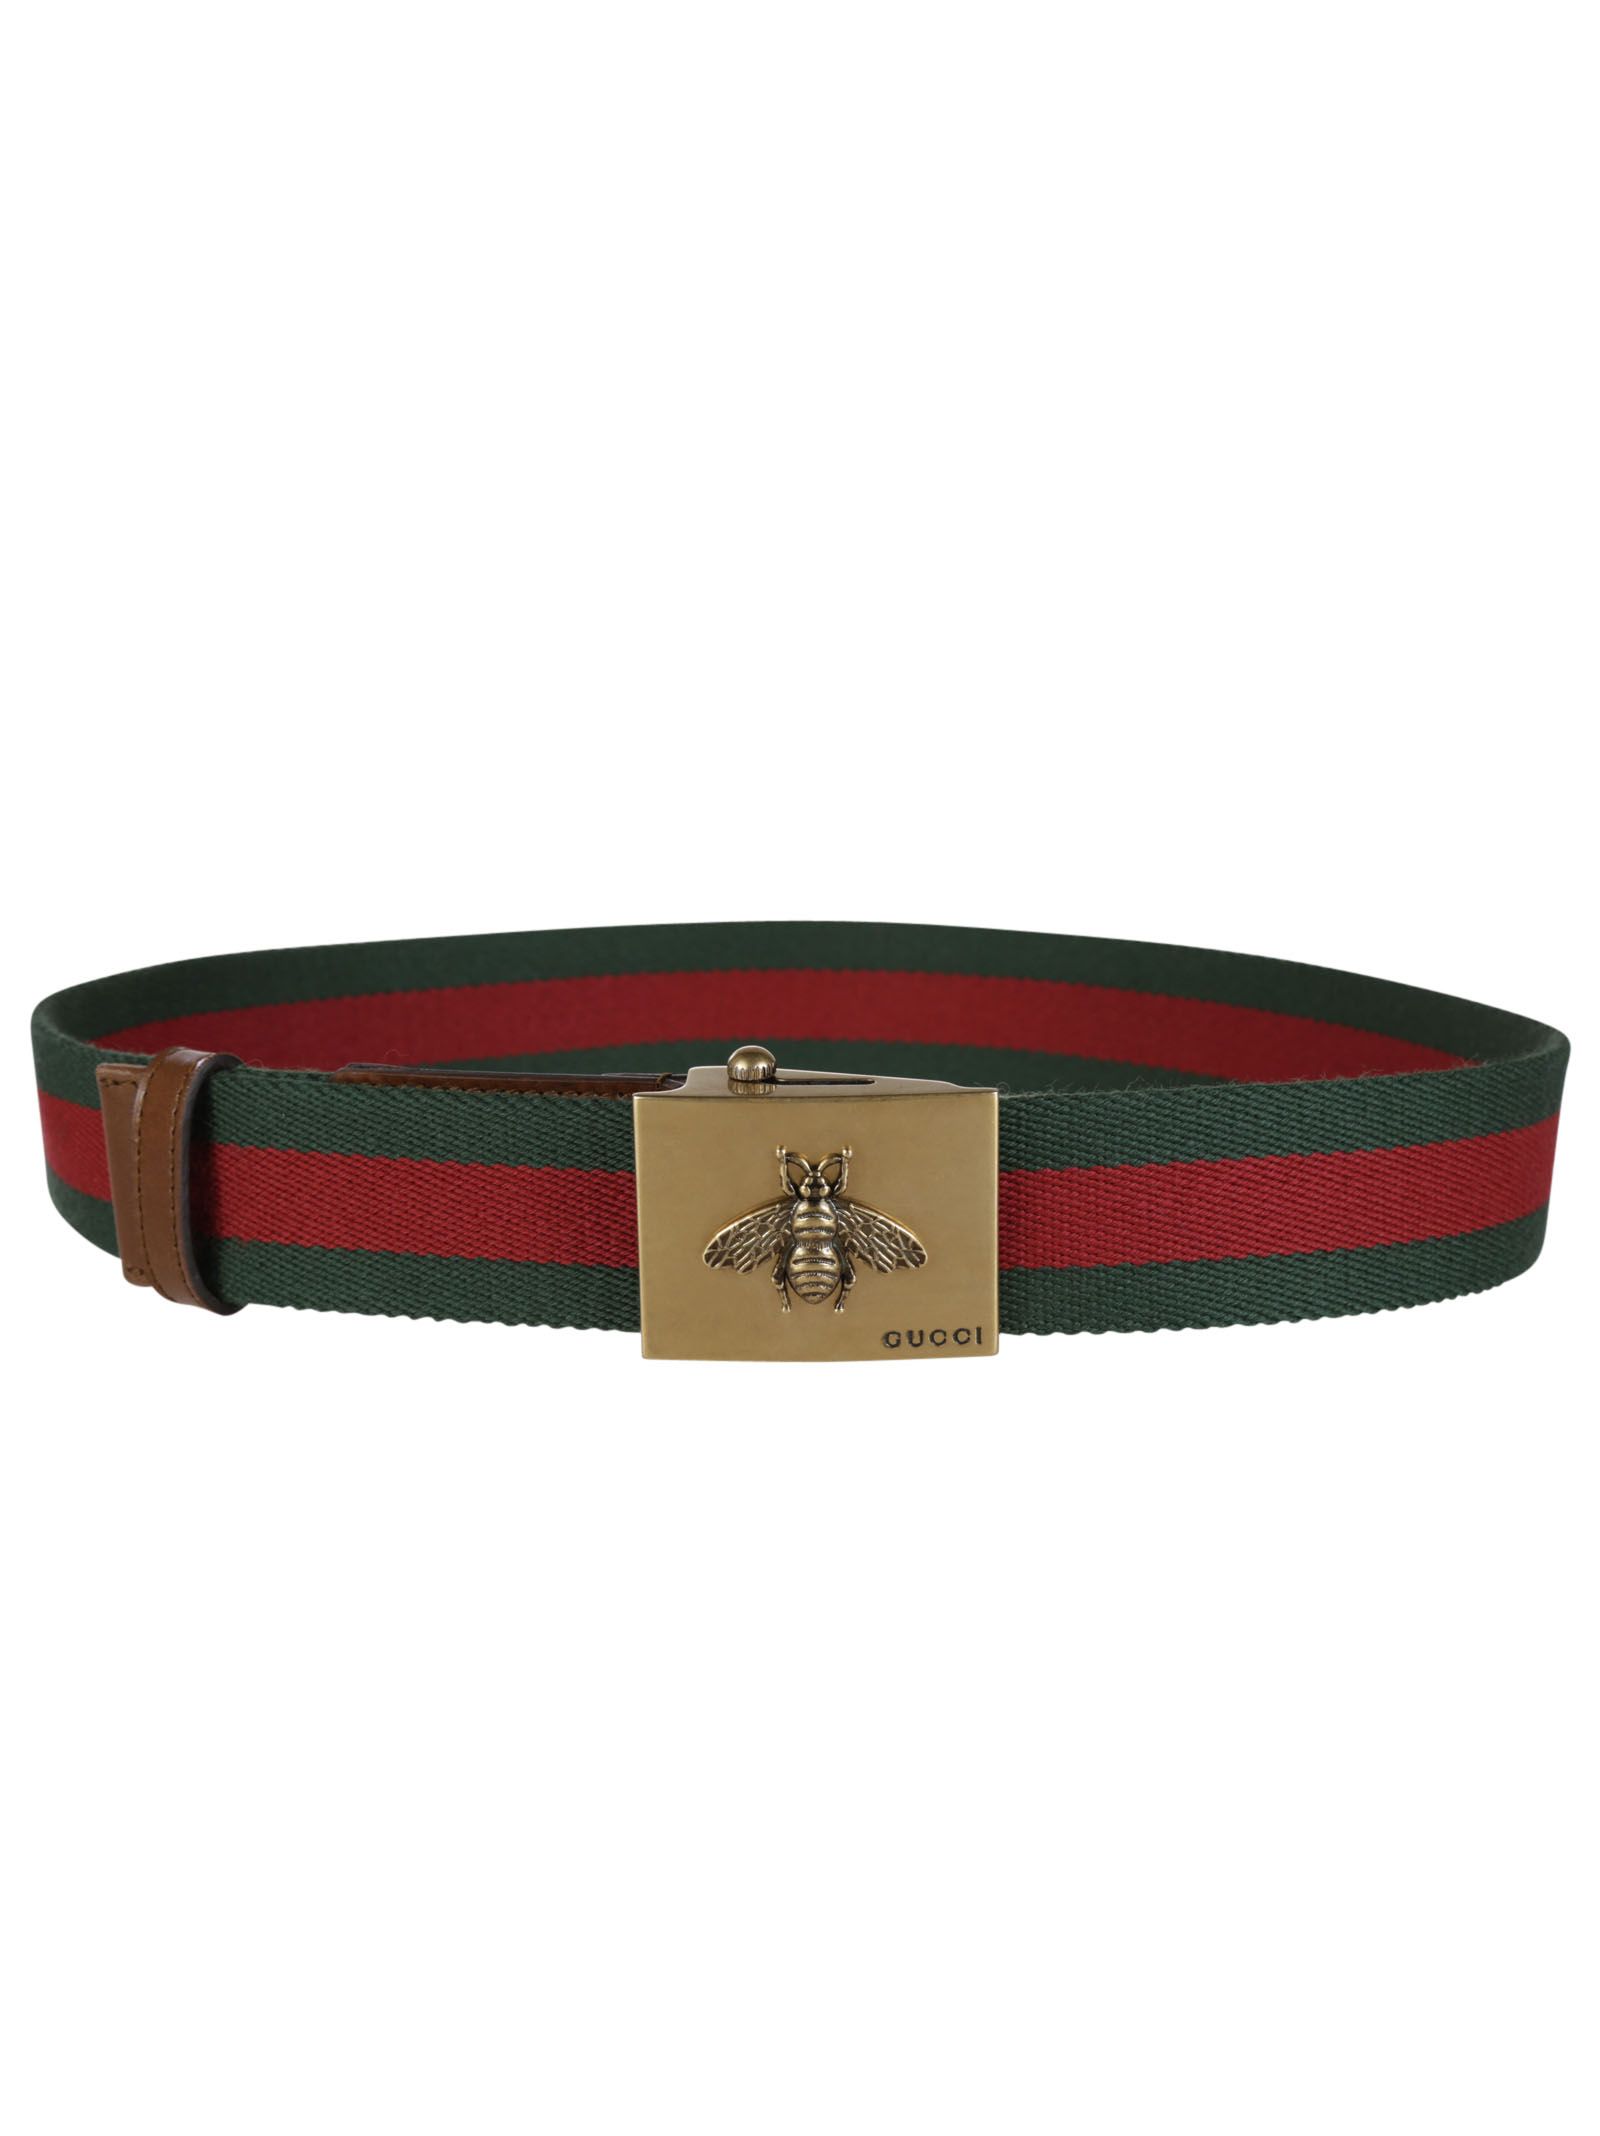 Gucci - Gucci Web Belt with Bee Buckle - Green/Red/Green, Women&#39;s Belts | Italist